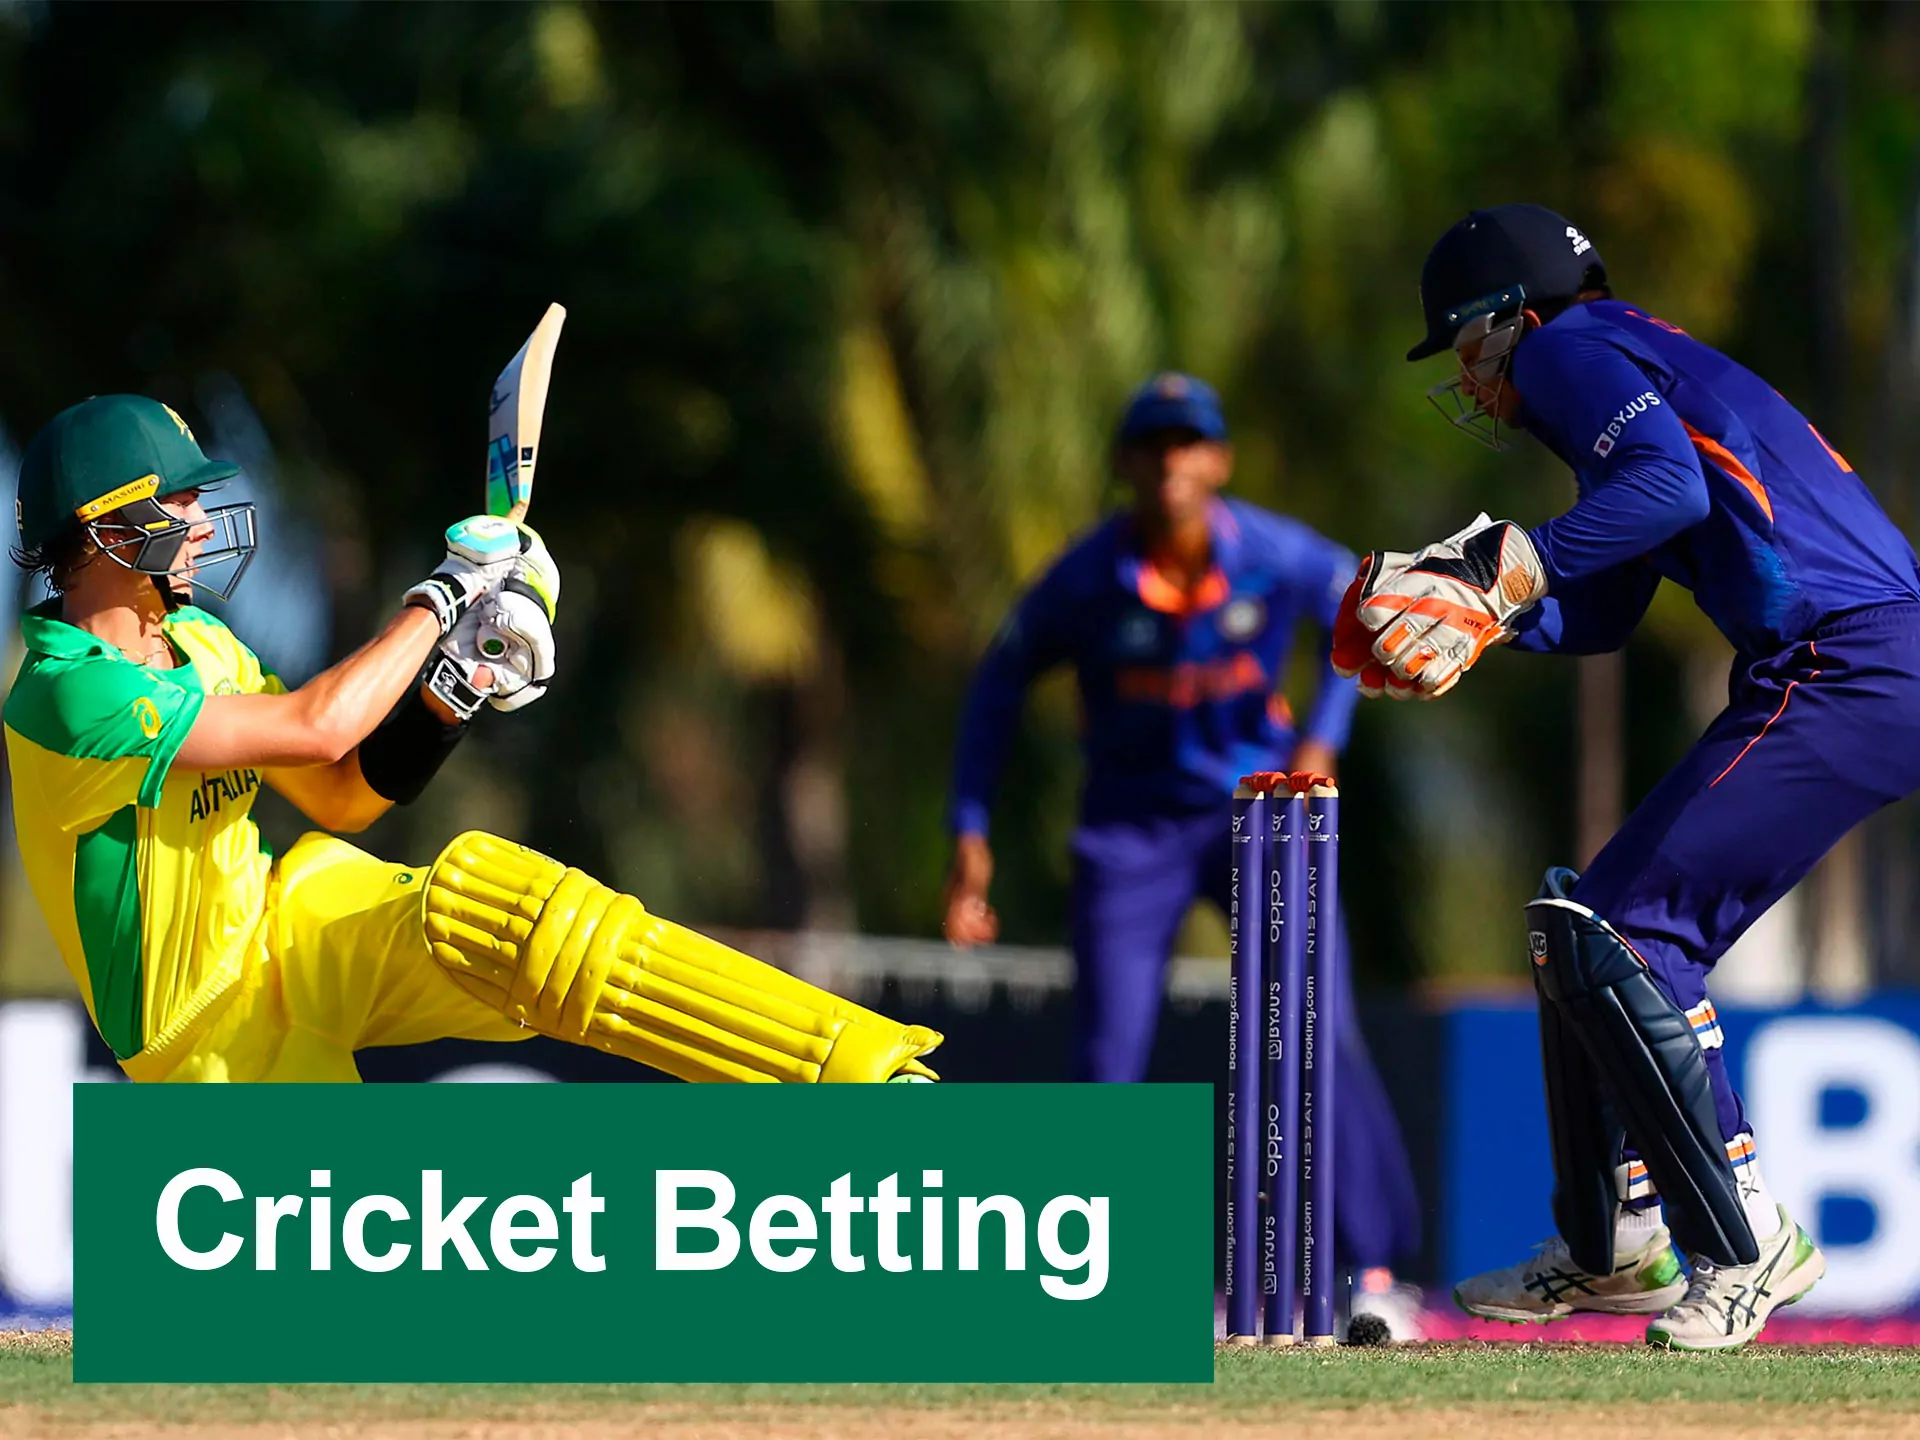 Bet on IPL matches and your favorite cicket teams at Melbet.